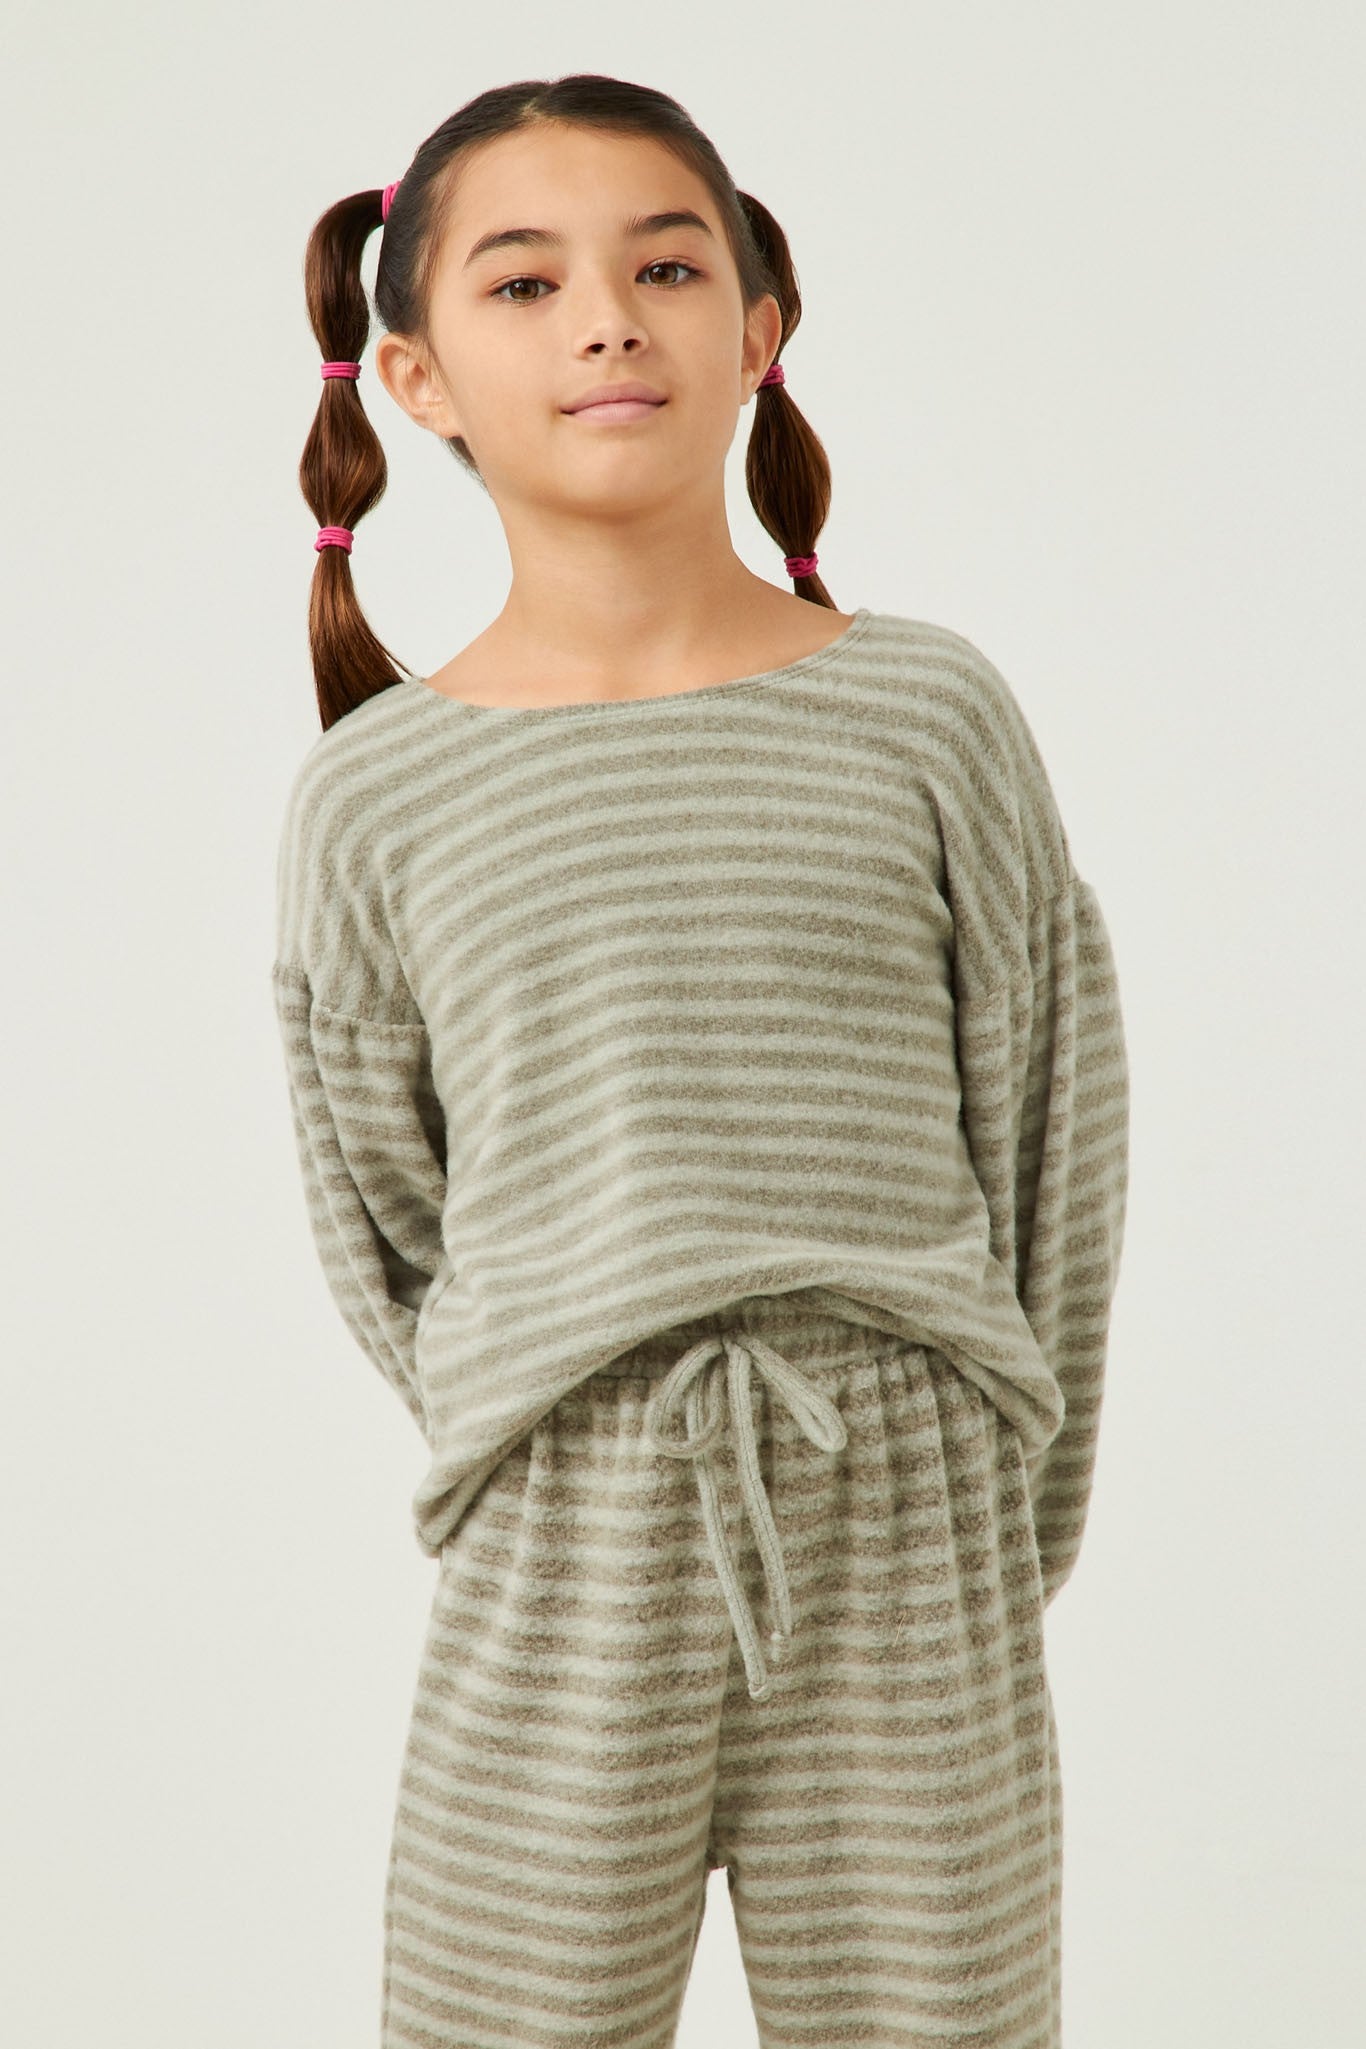 Brushed Stripe Puff Sleeve Knit Top - That's So Darling